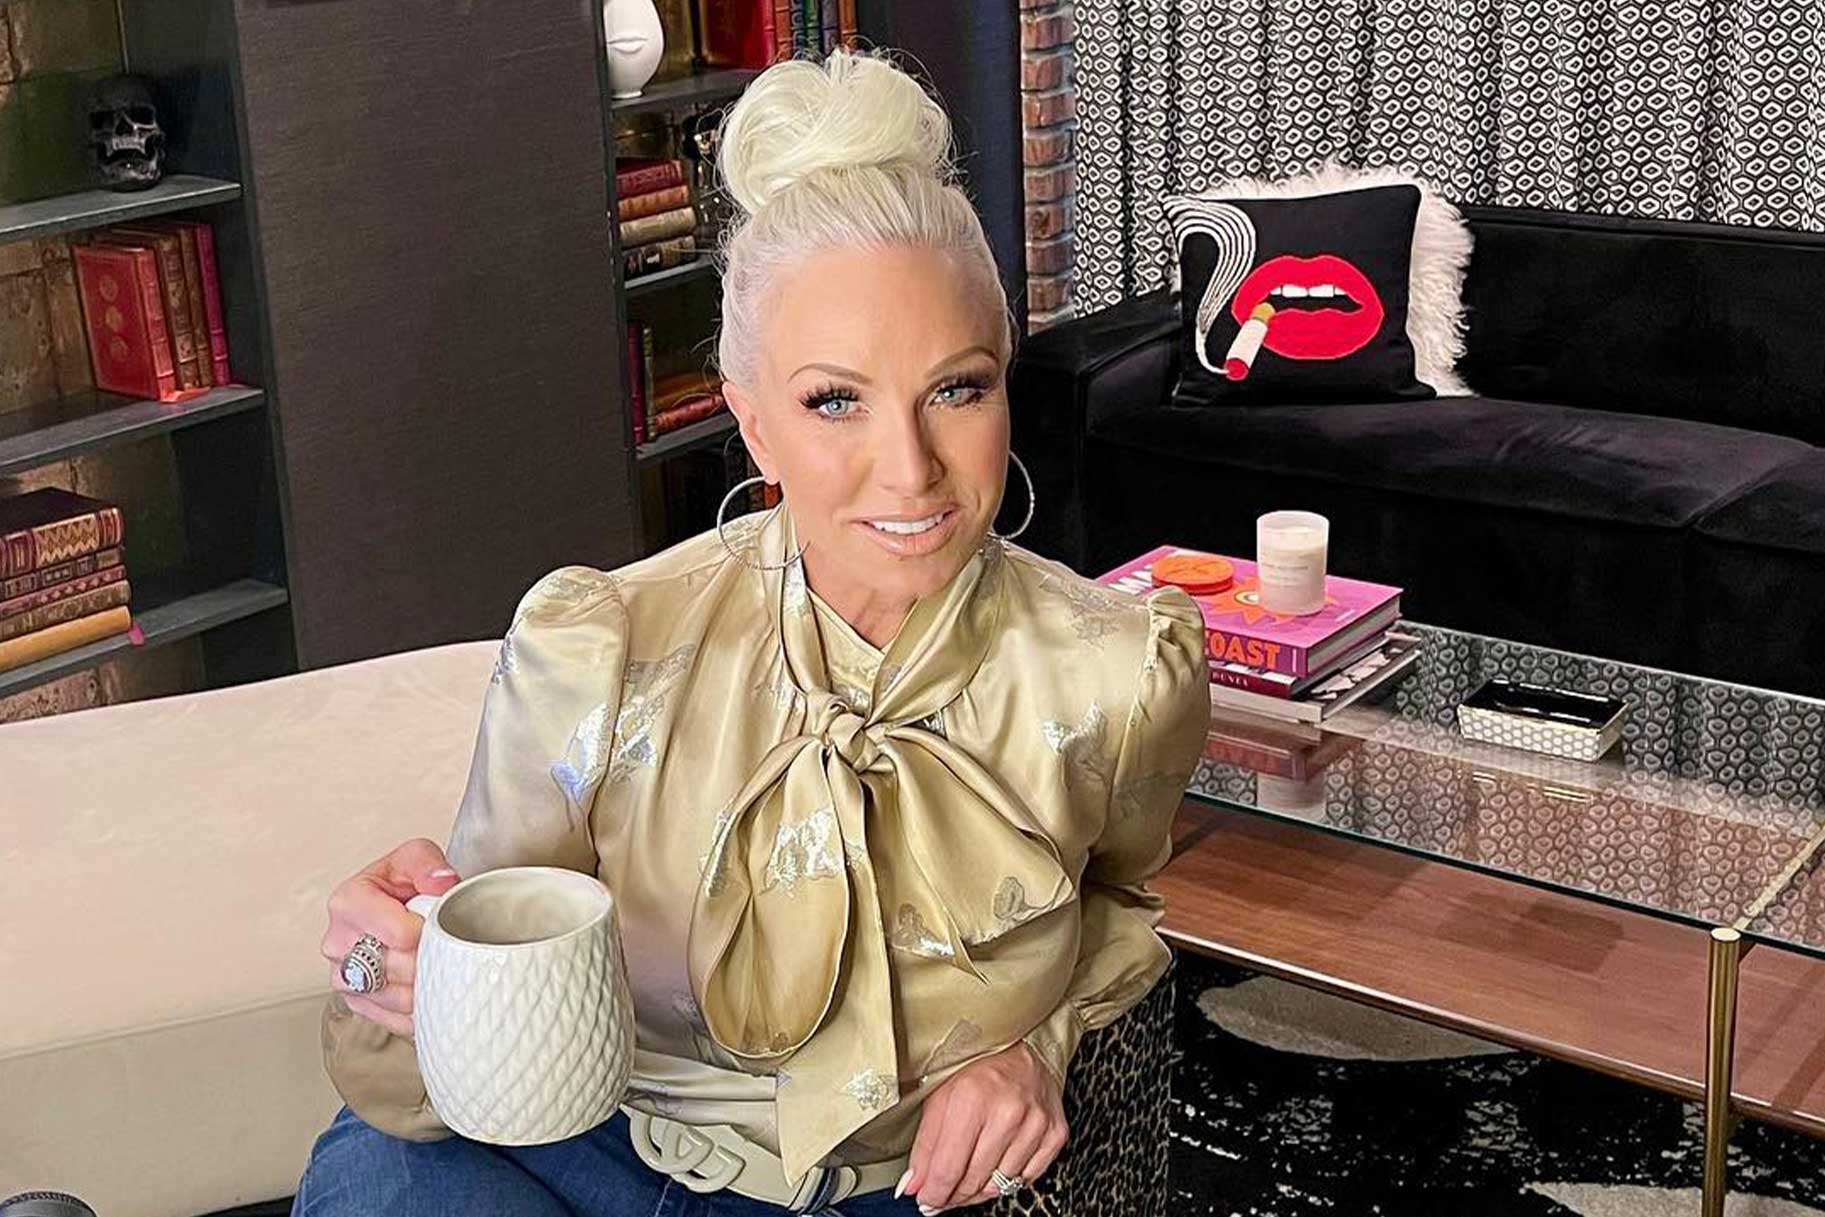 Margaret Josephs of the Real Housewives of New Jersey.